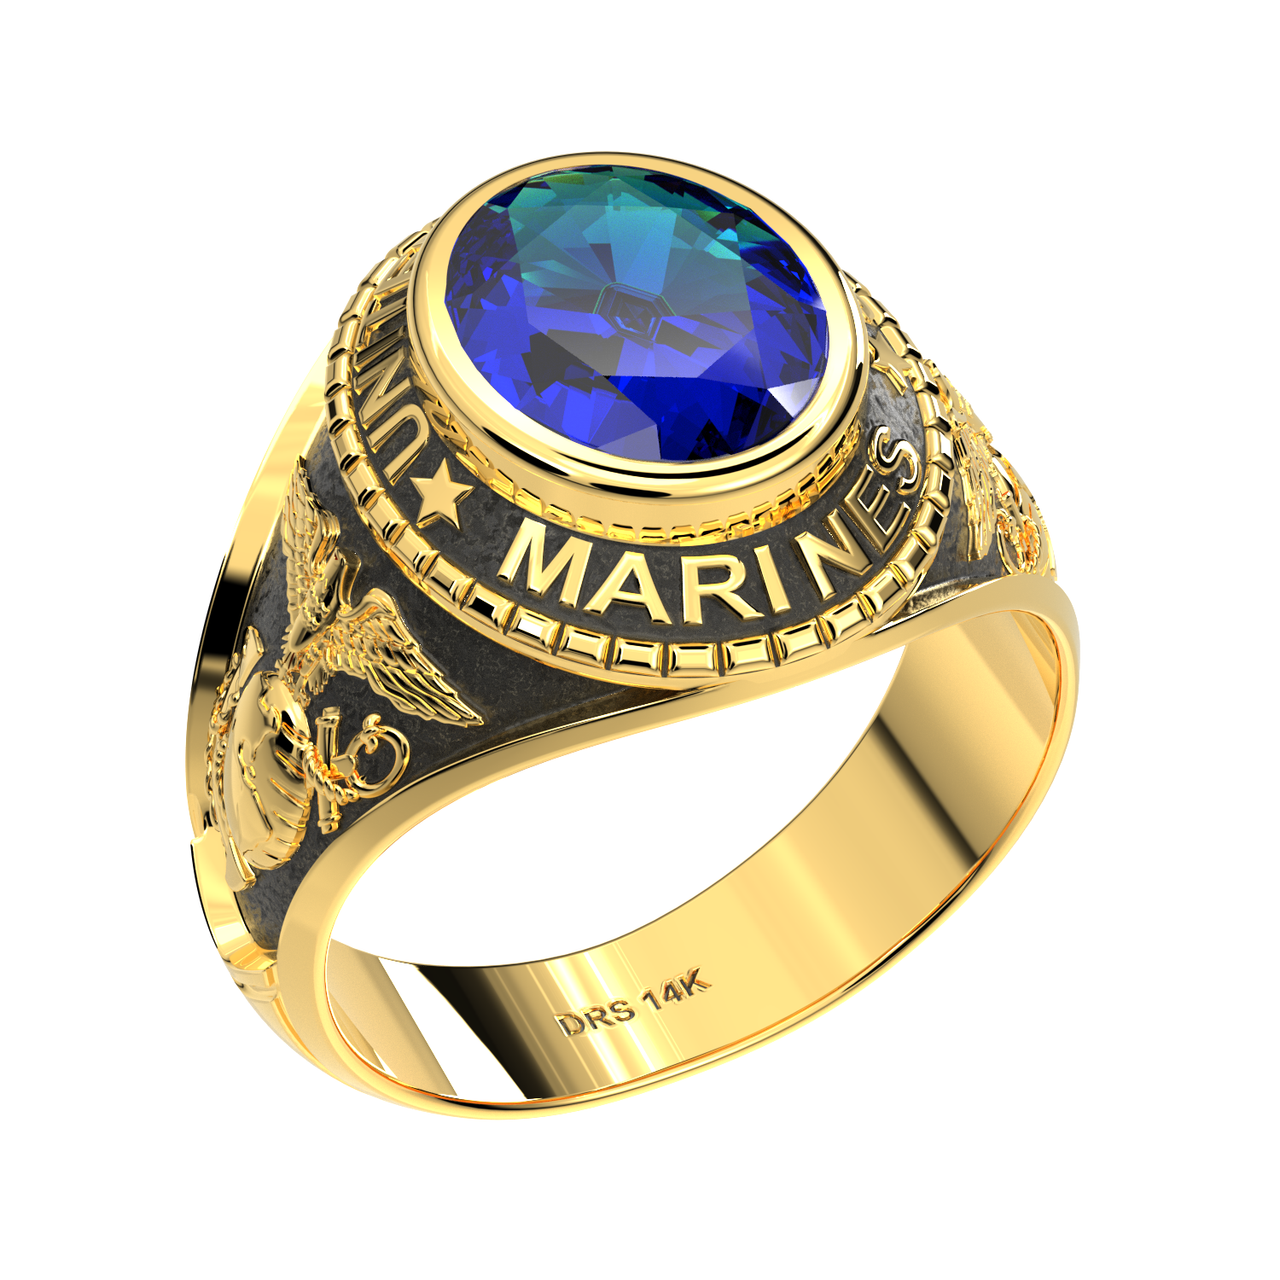 Customizable Men's Antiqued 14k Yellow or White Gold US Marine Corps Military Solid Back Ring